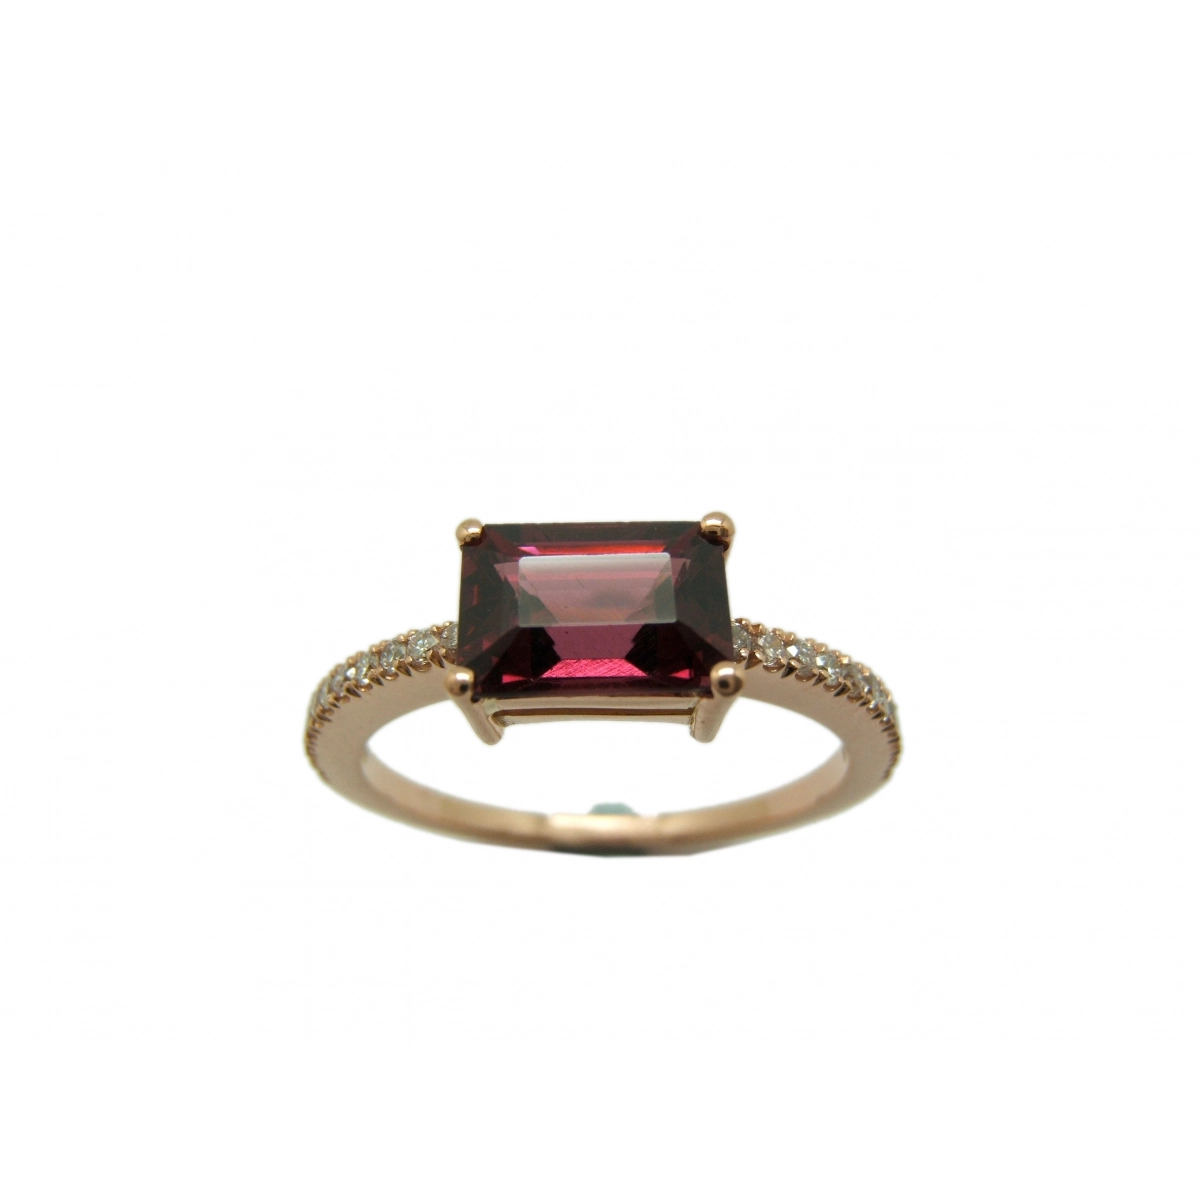 RING ROSE GOLD RHODOLITE AND DIAMOND A-416 B-79